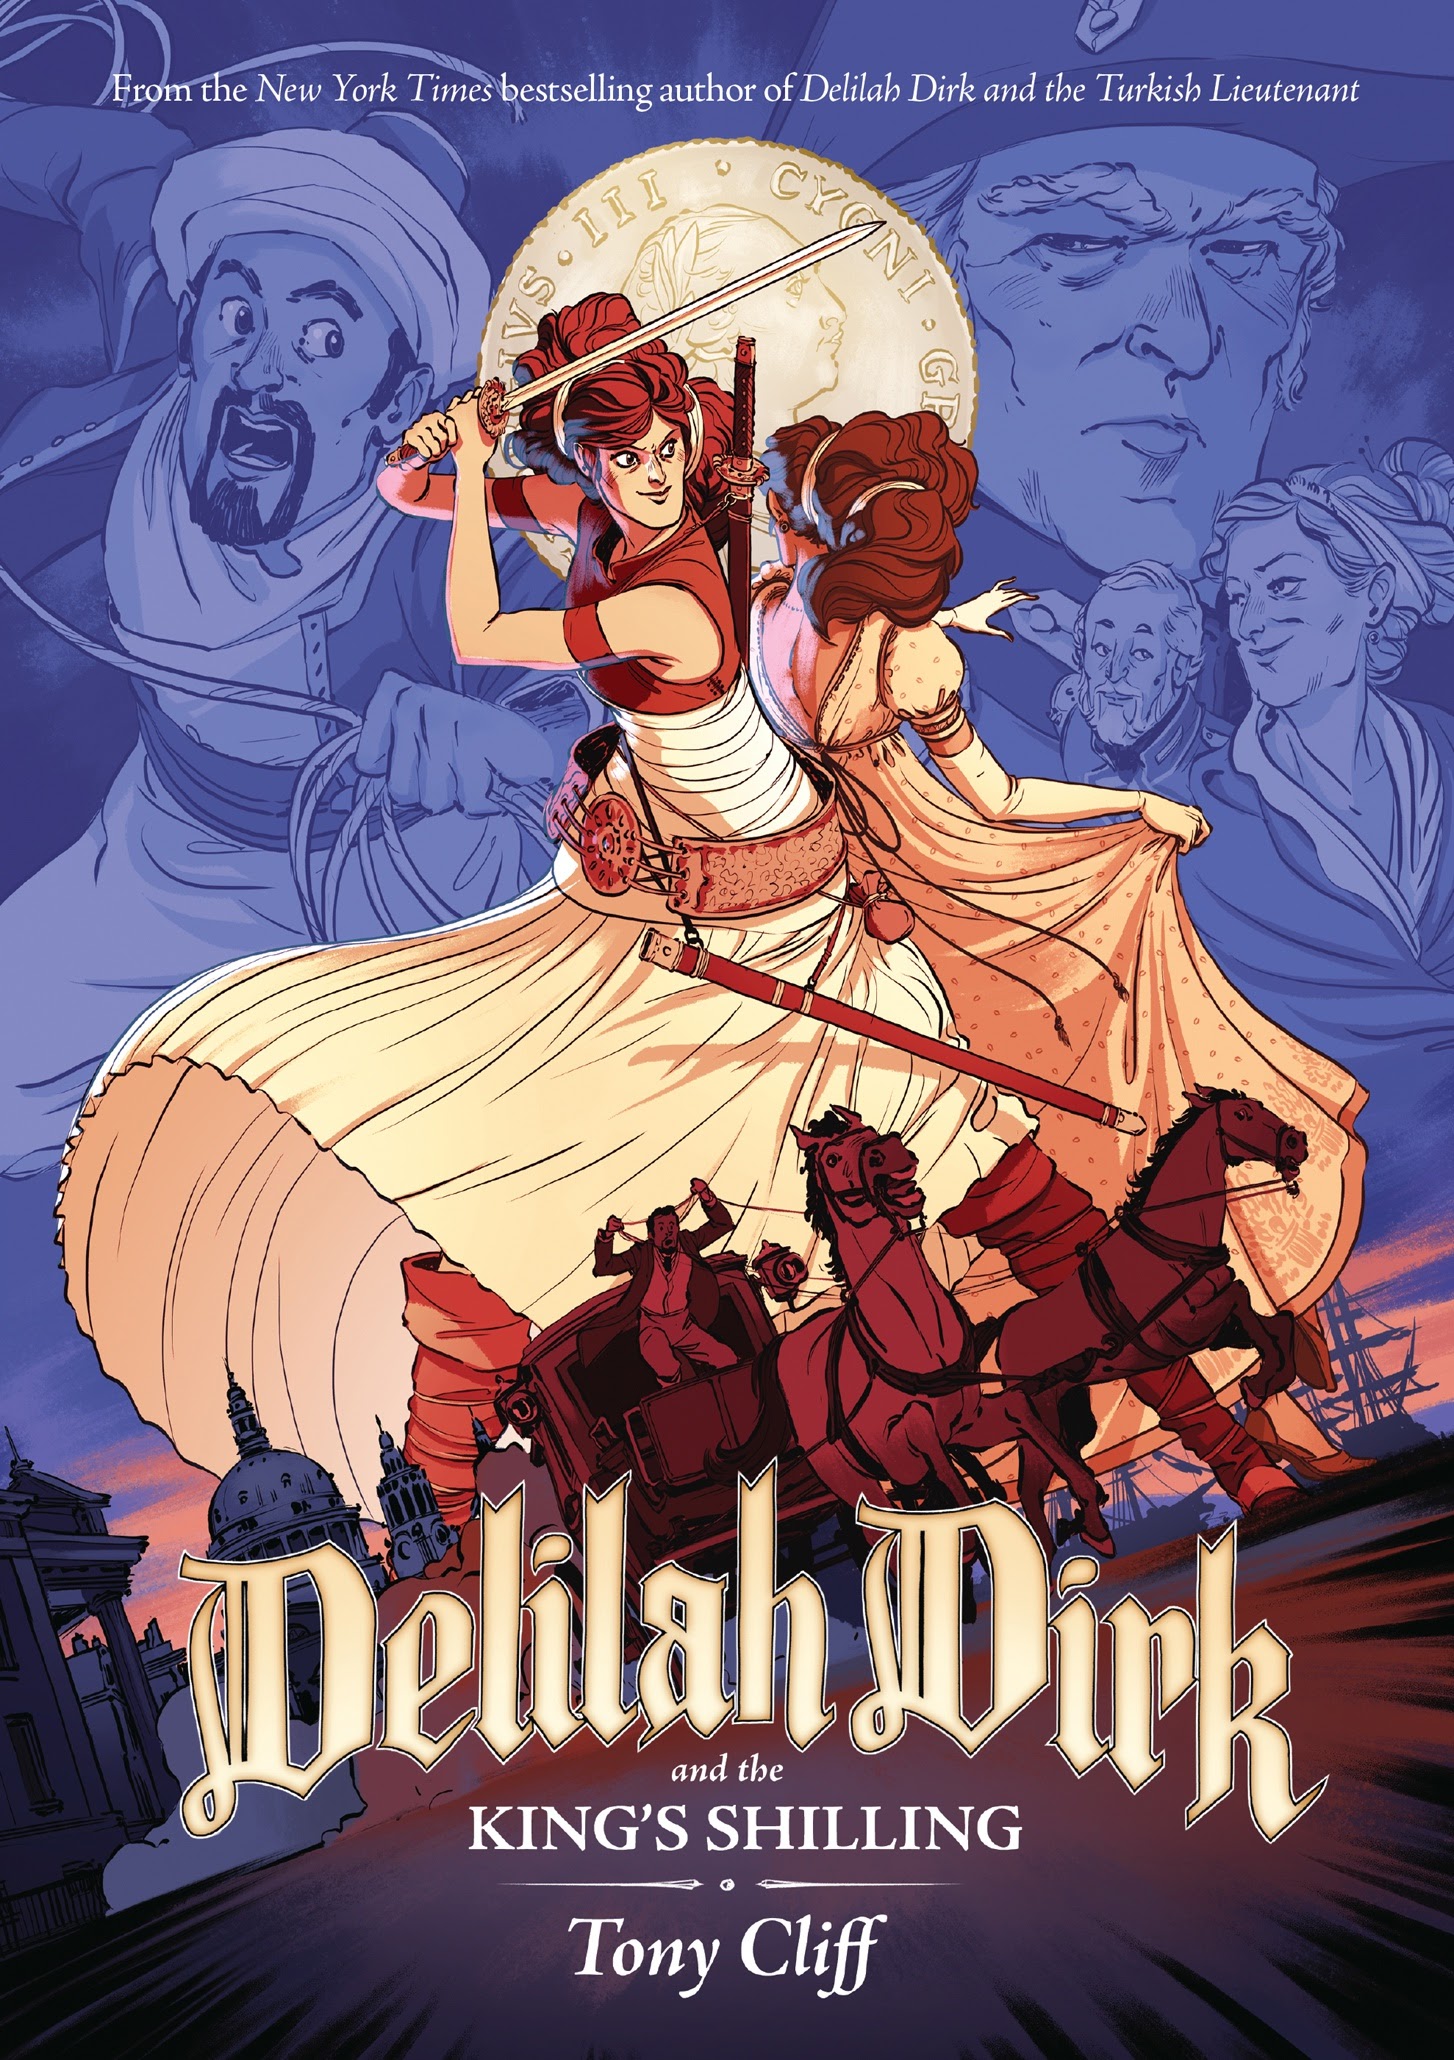 Read online Delilah Dirk and the King's Shilling comic -  Issue # TPB (Part 1) - 1